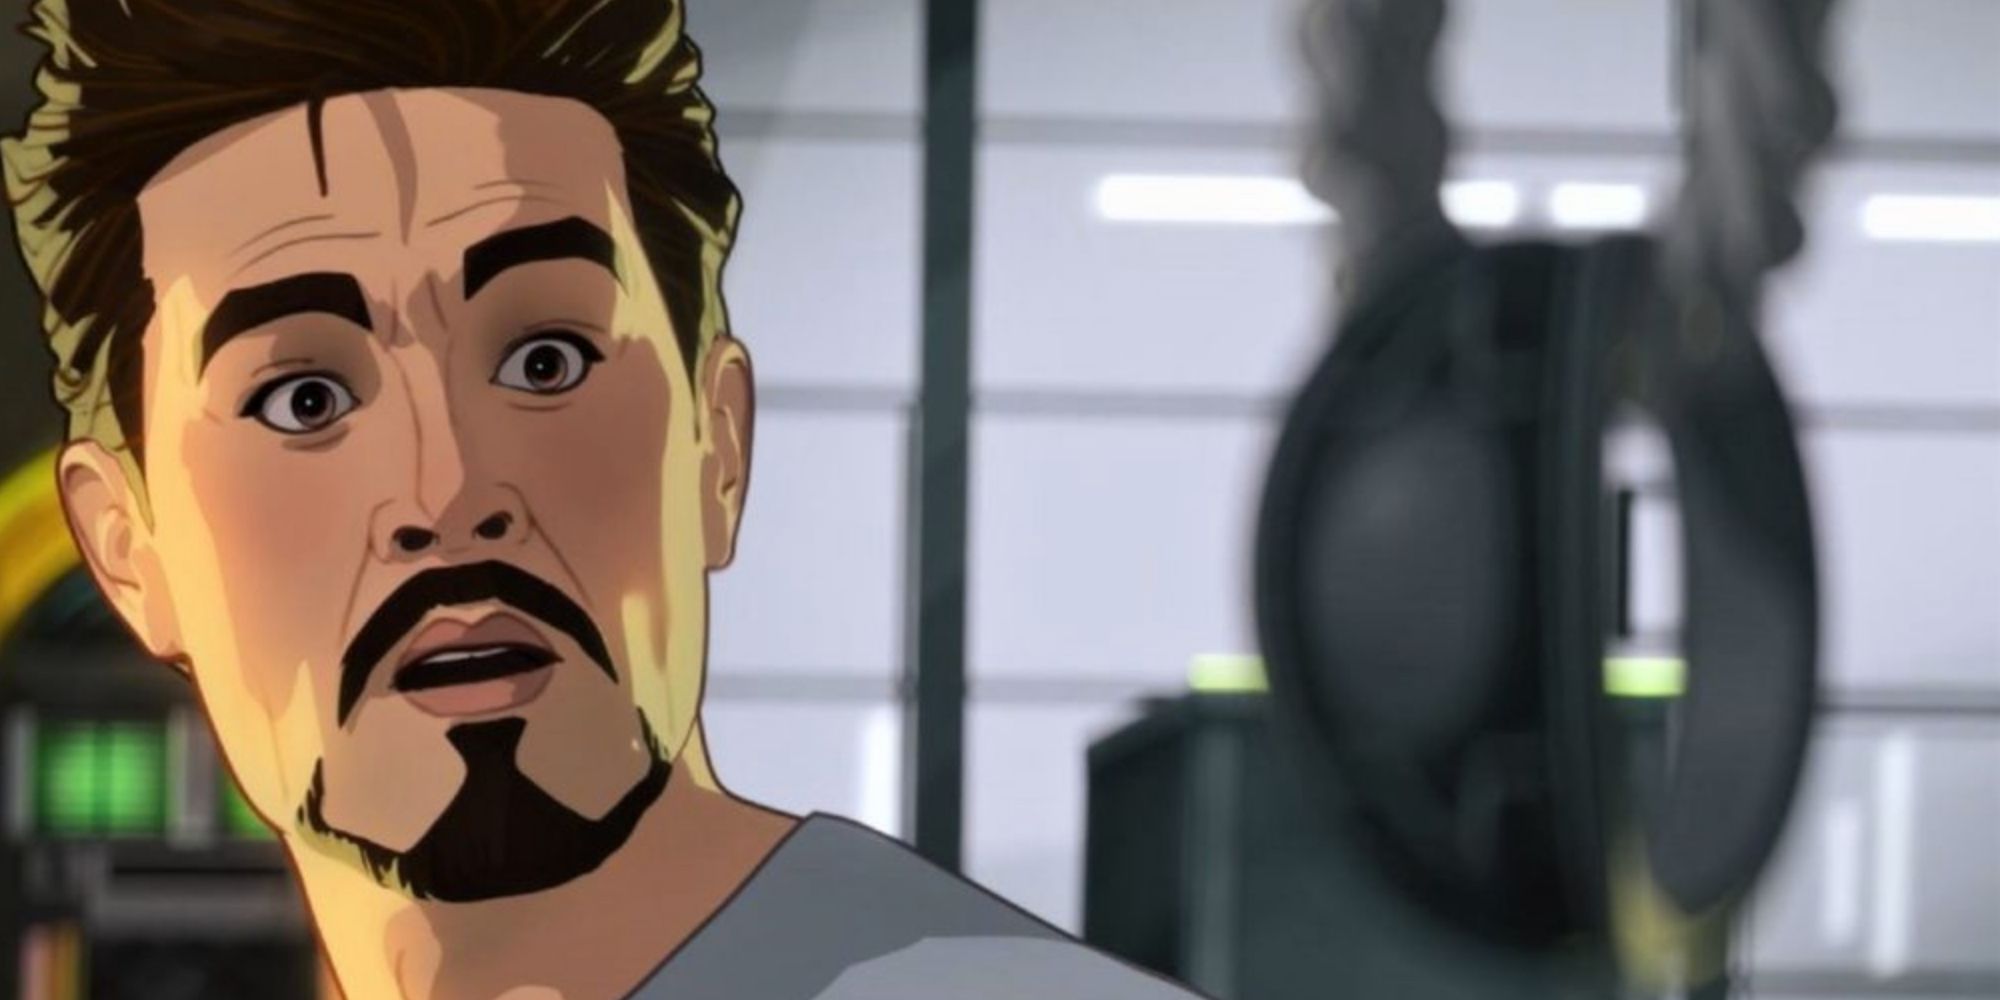 Tony Stark is surprised in What If episode 6